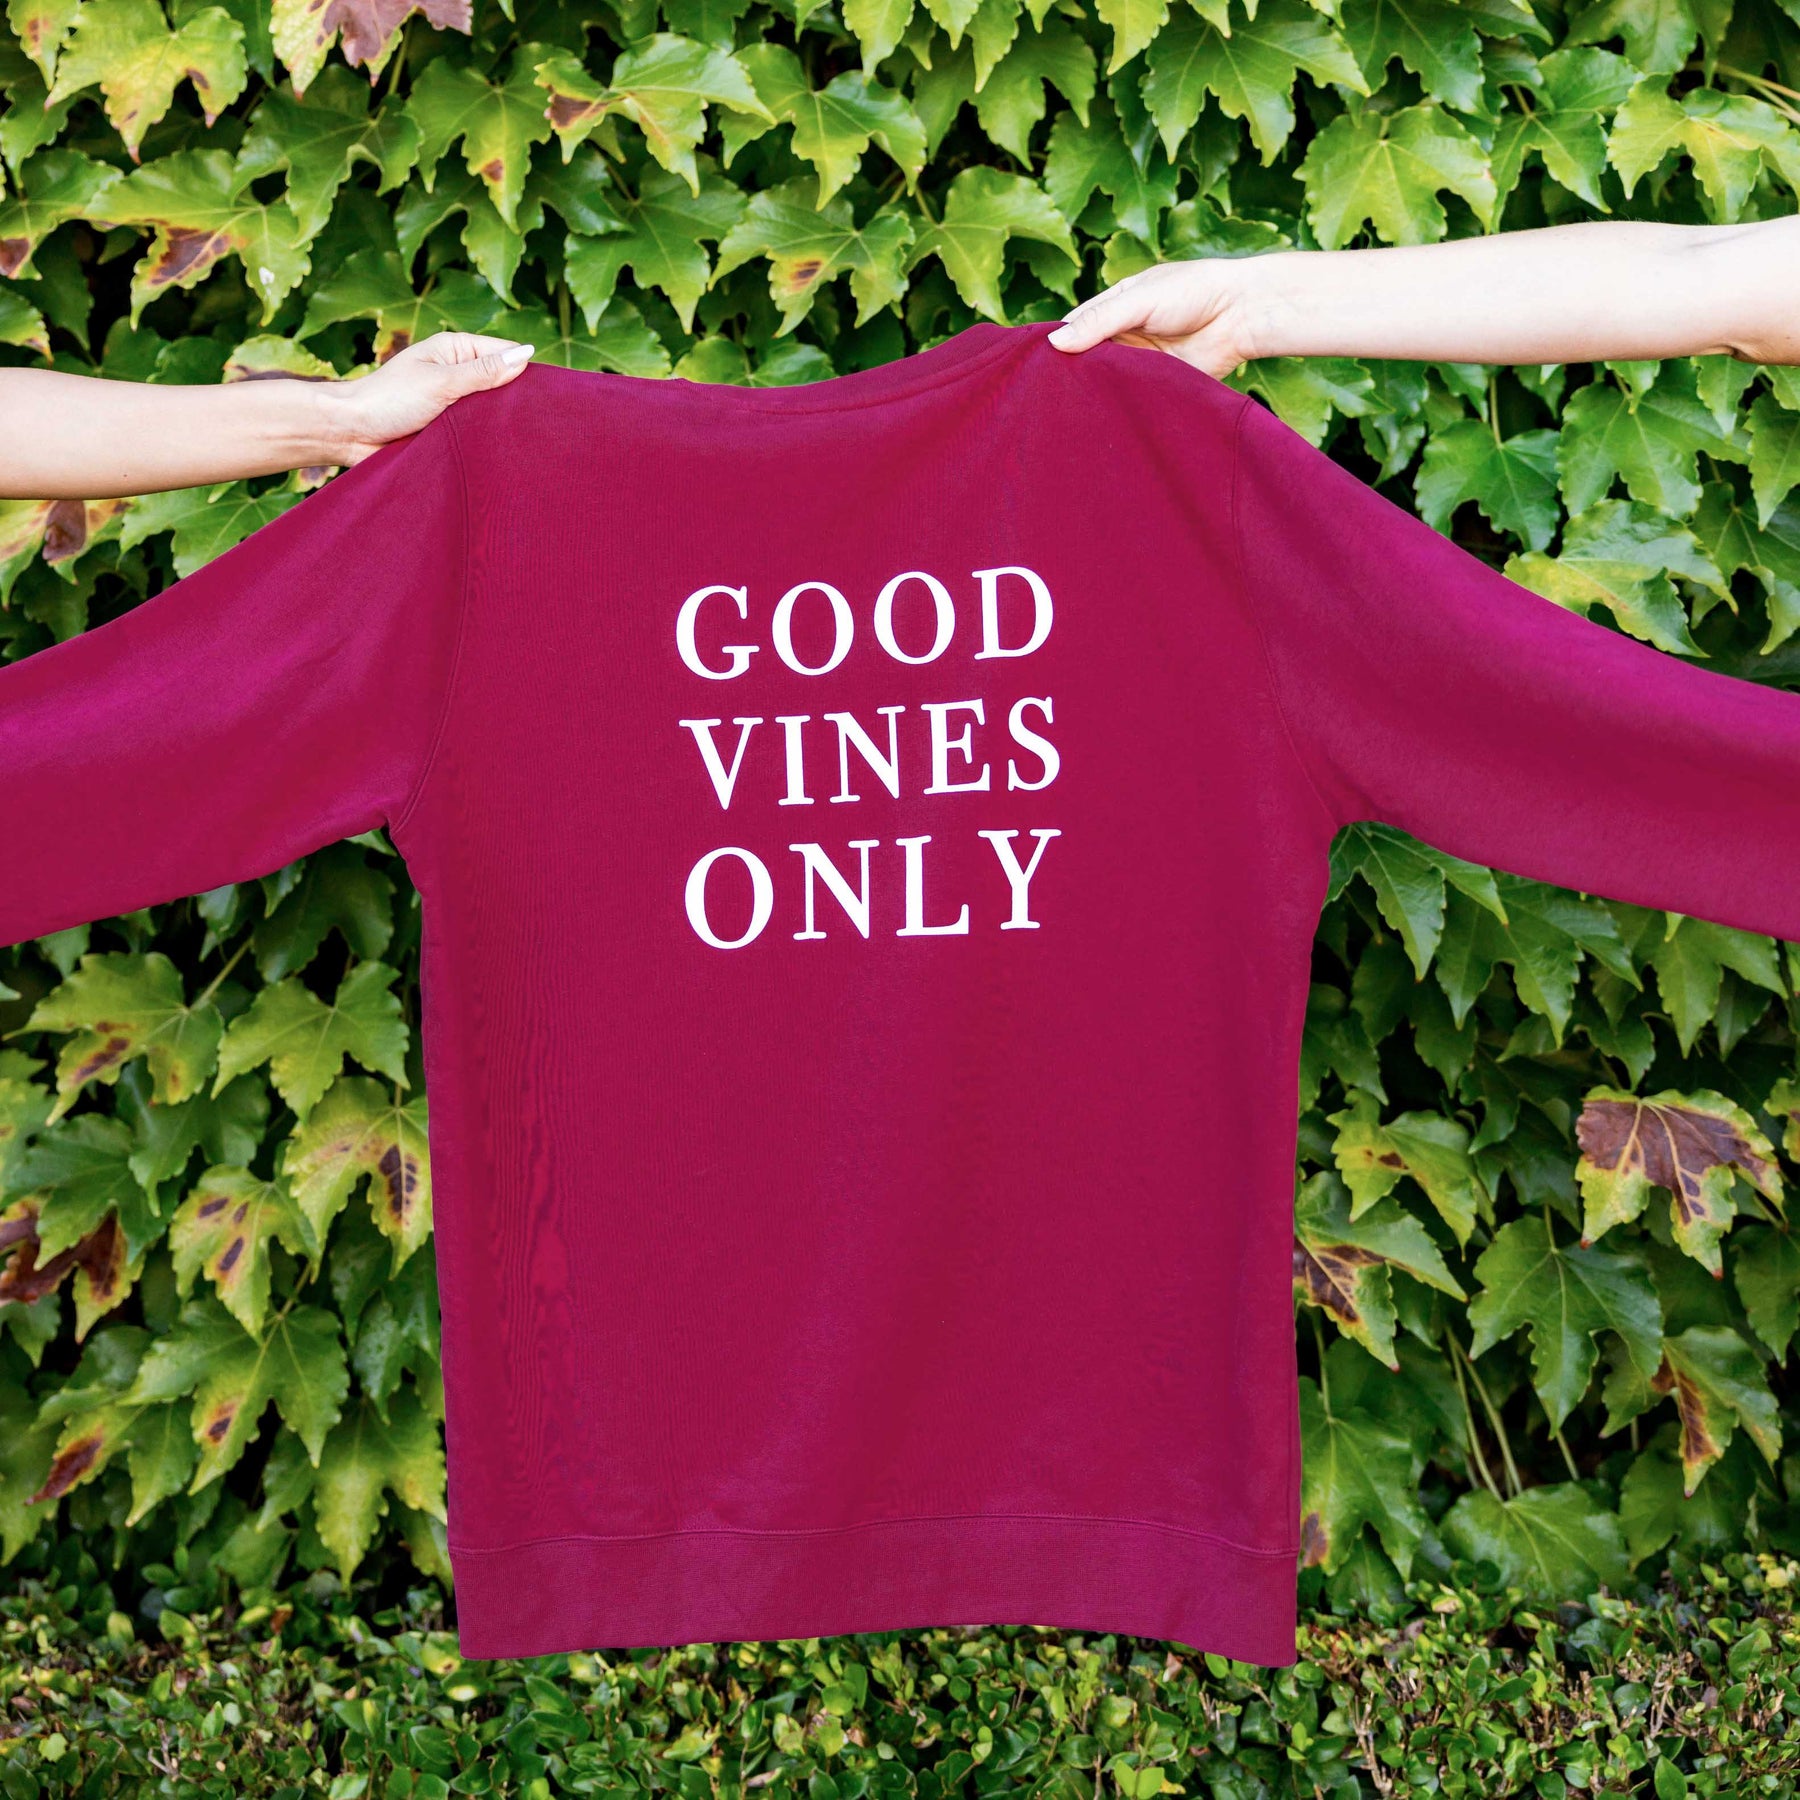 https://cdn.shopify.com/s/files/1/0804/1709/products/kenny-flowers-good-vines-only-mens-womens-napa-collection-unisex-red-burgundy-sweatshirt-crew-neck-00007_1800x1800.jpg?v=1663079066